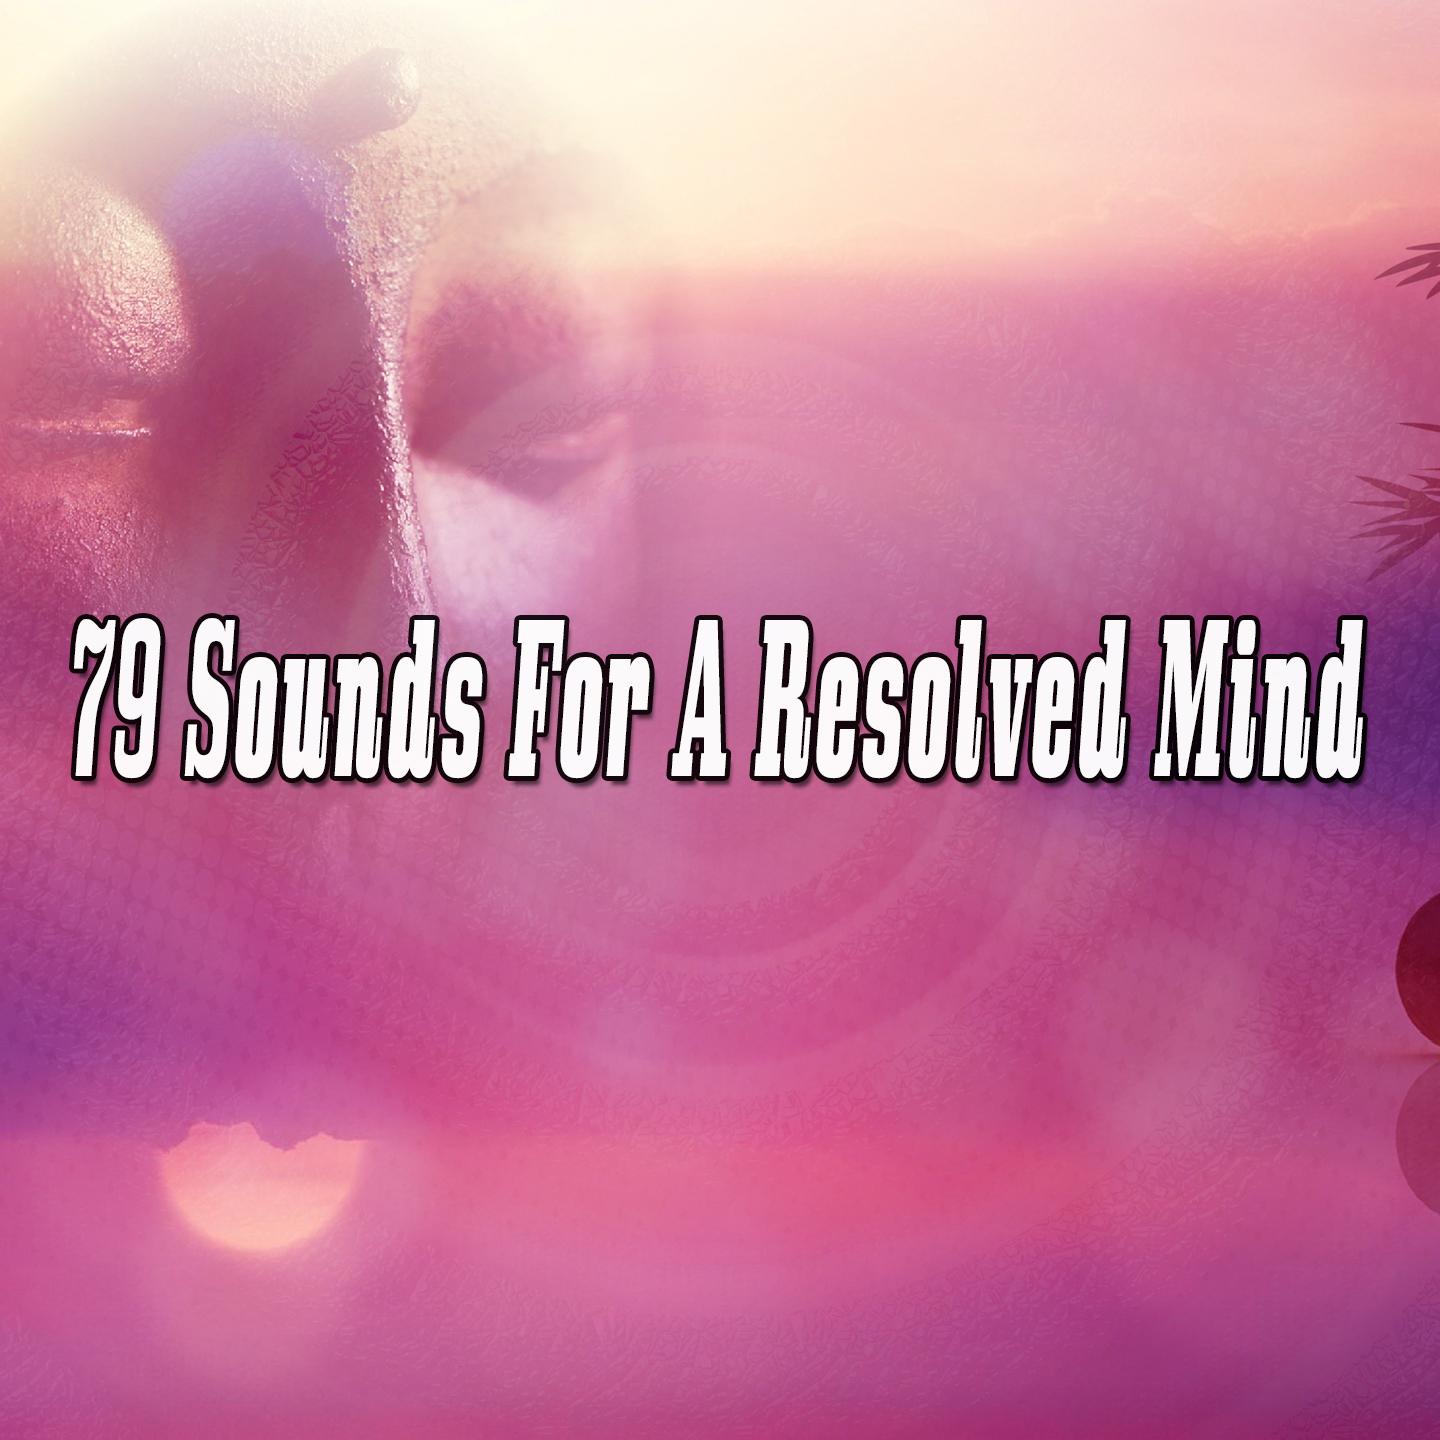 79 Sounds For A Resolved Mind